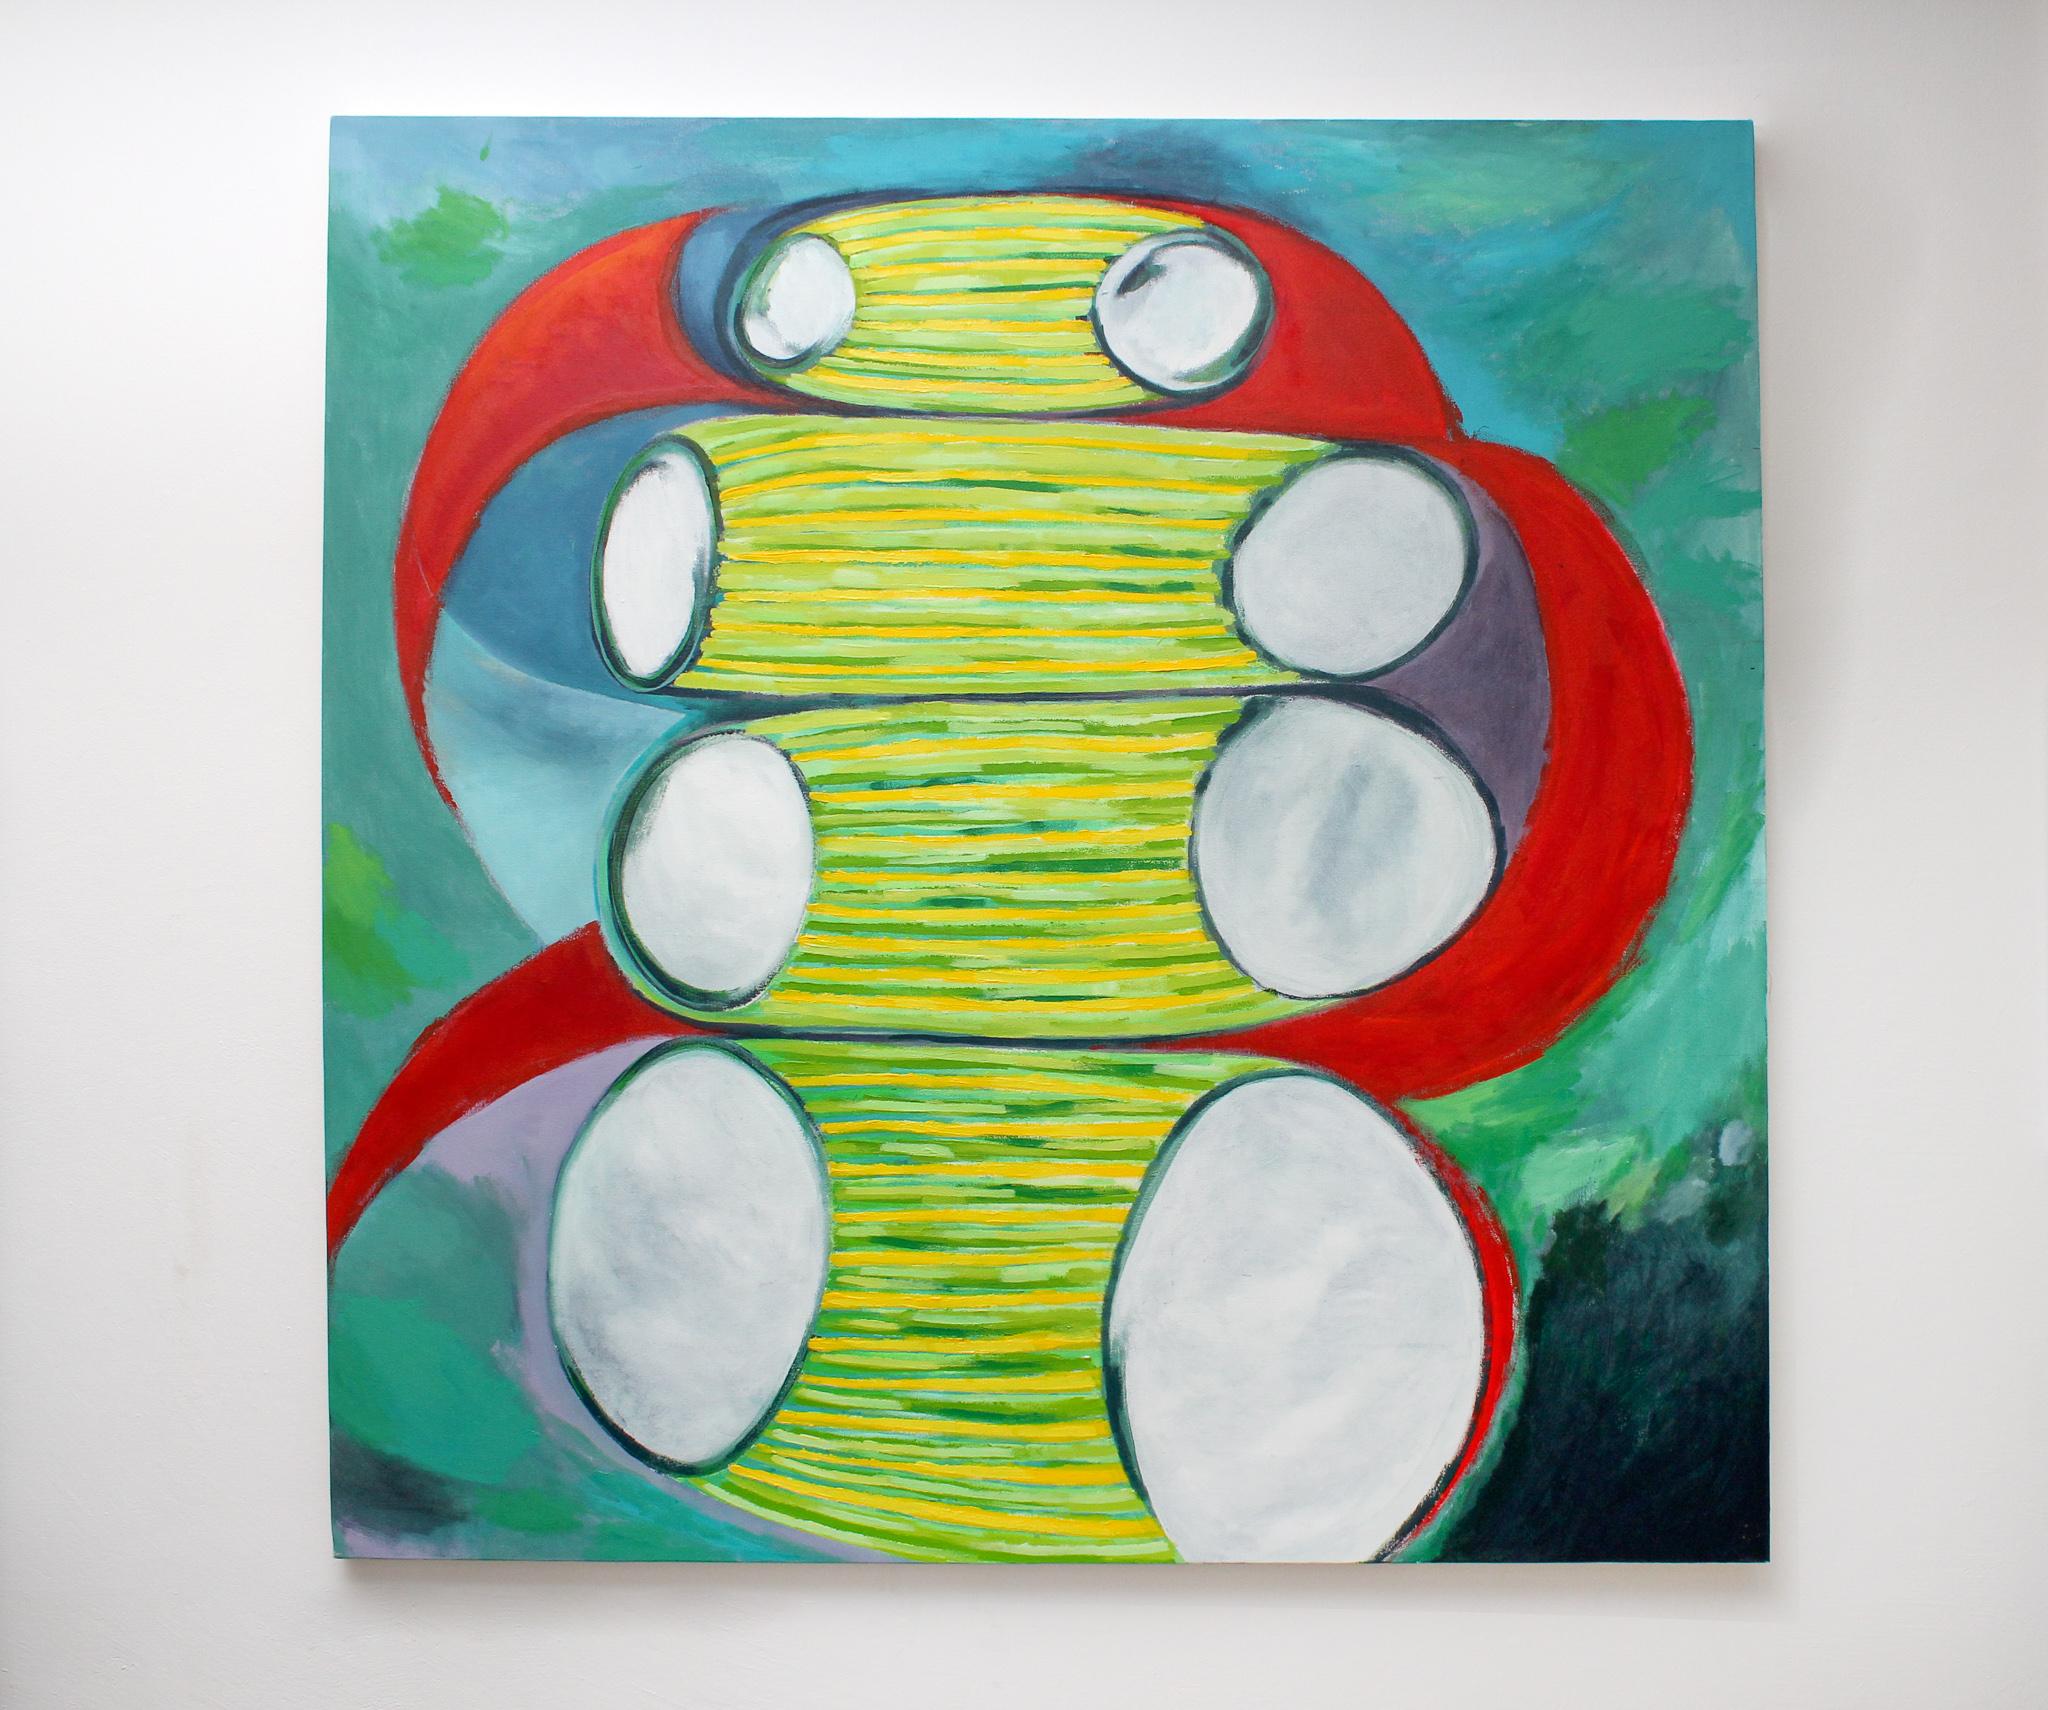 Stacked Portals, Nicky Marais, Acrylic Painting on Canvas